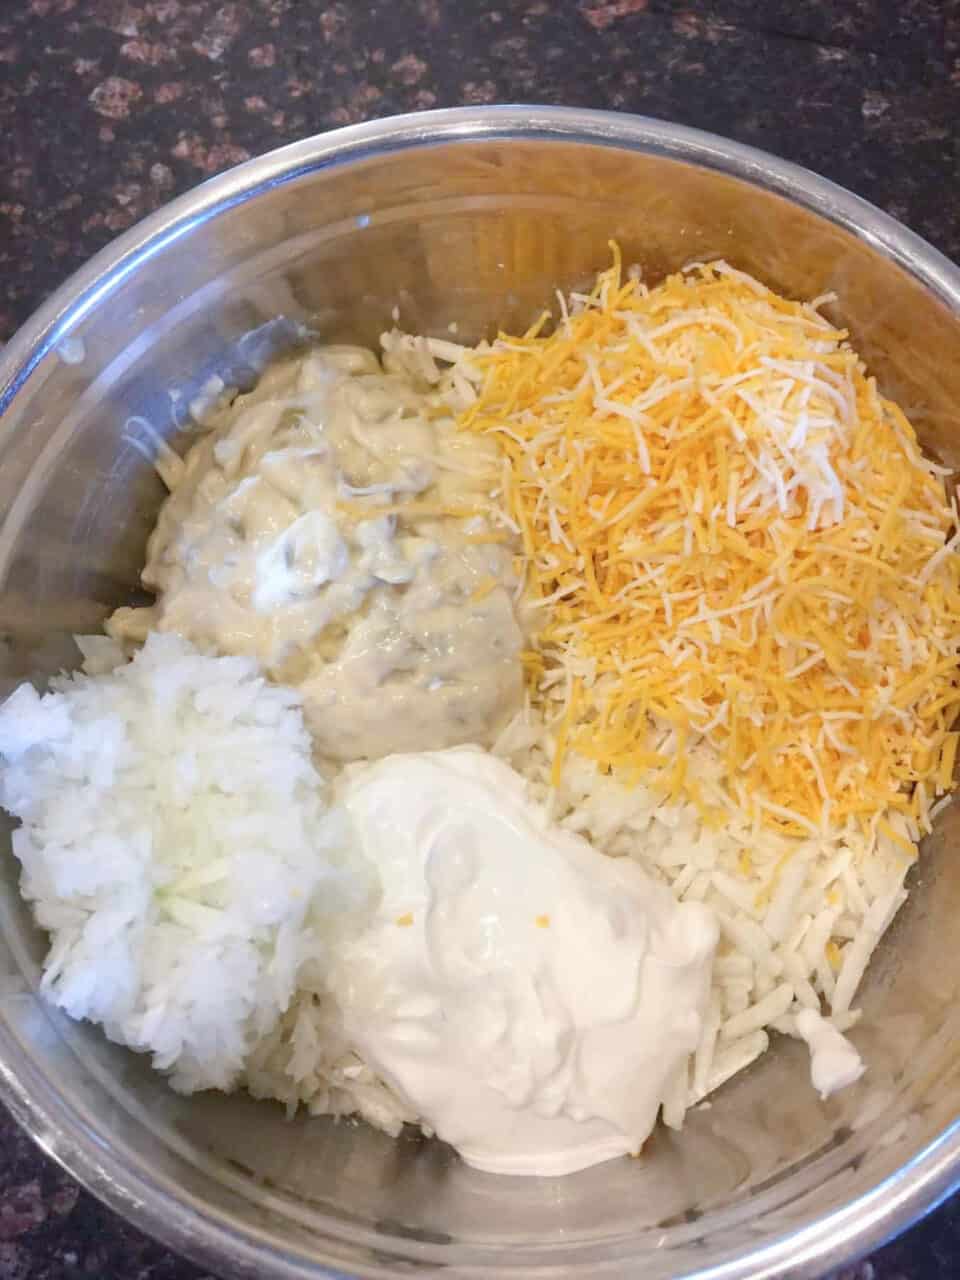 Potatoes, cheese, onion, sour cream and soup in a bowl prior to mixing.